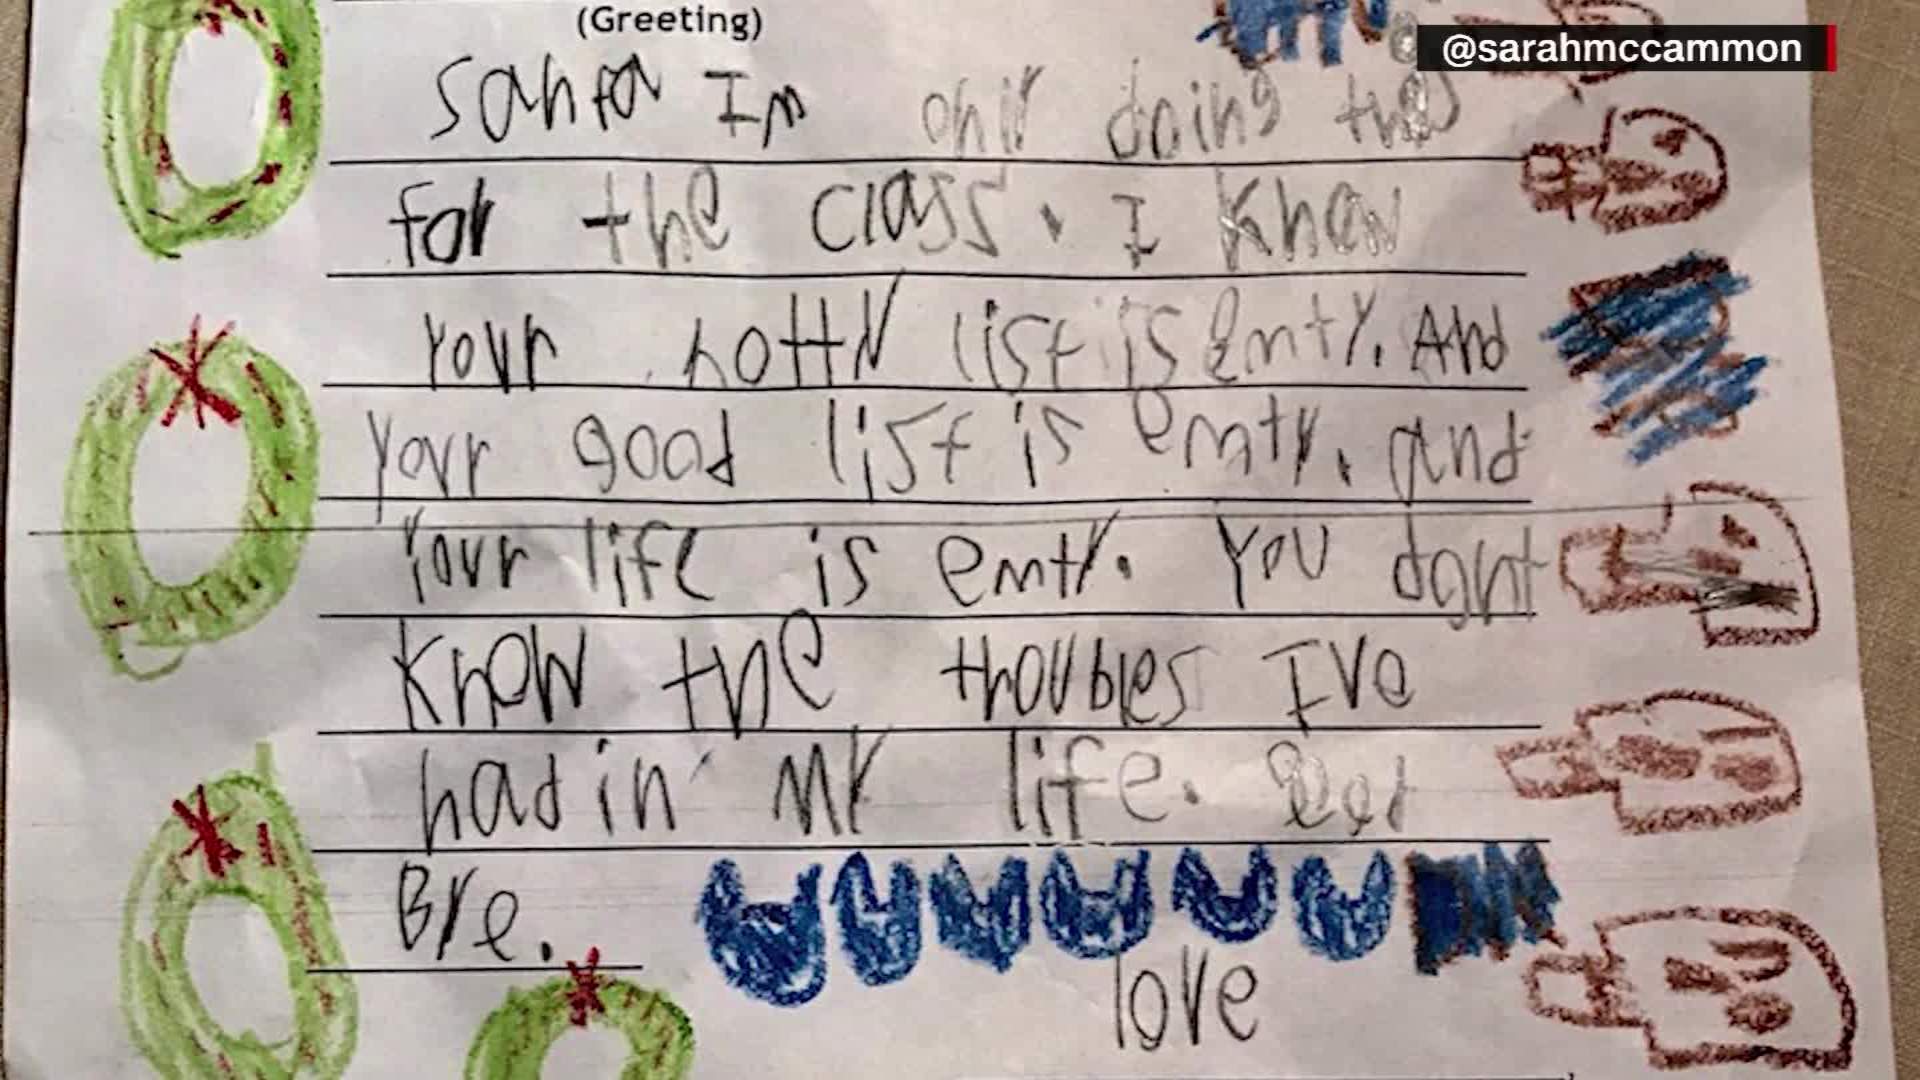 LETTERS TO SANTA: Houston Schools, Chickasaw Journal